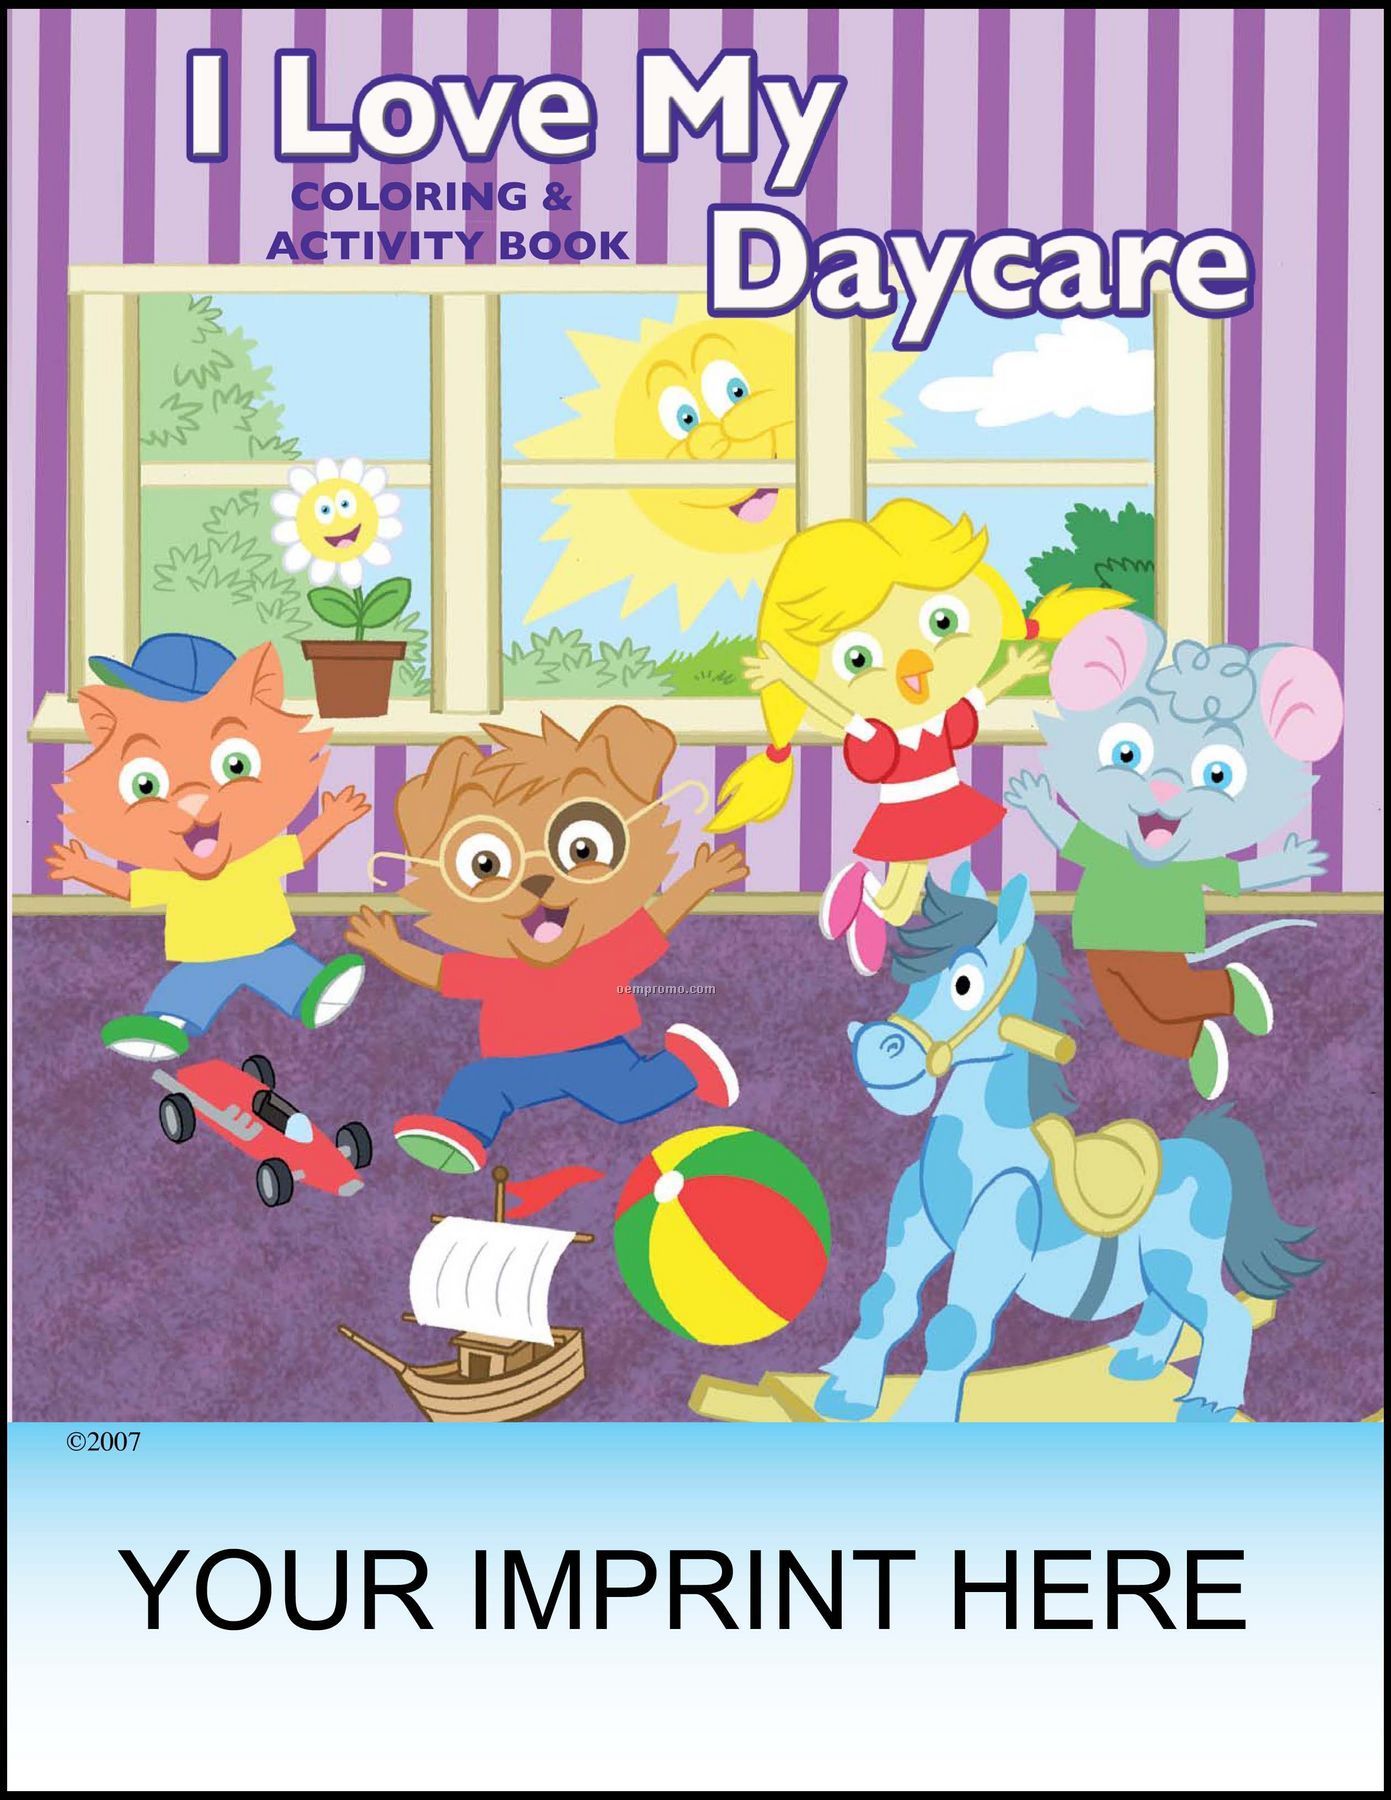 I Love My Daycare Coloring & Activity Book